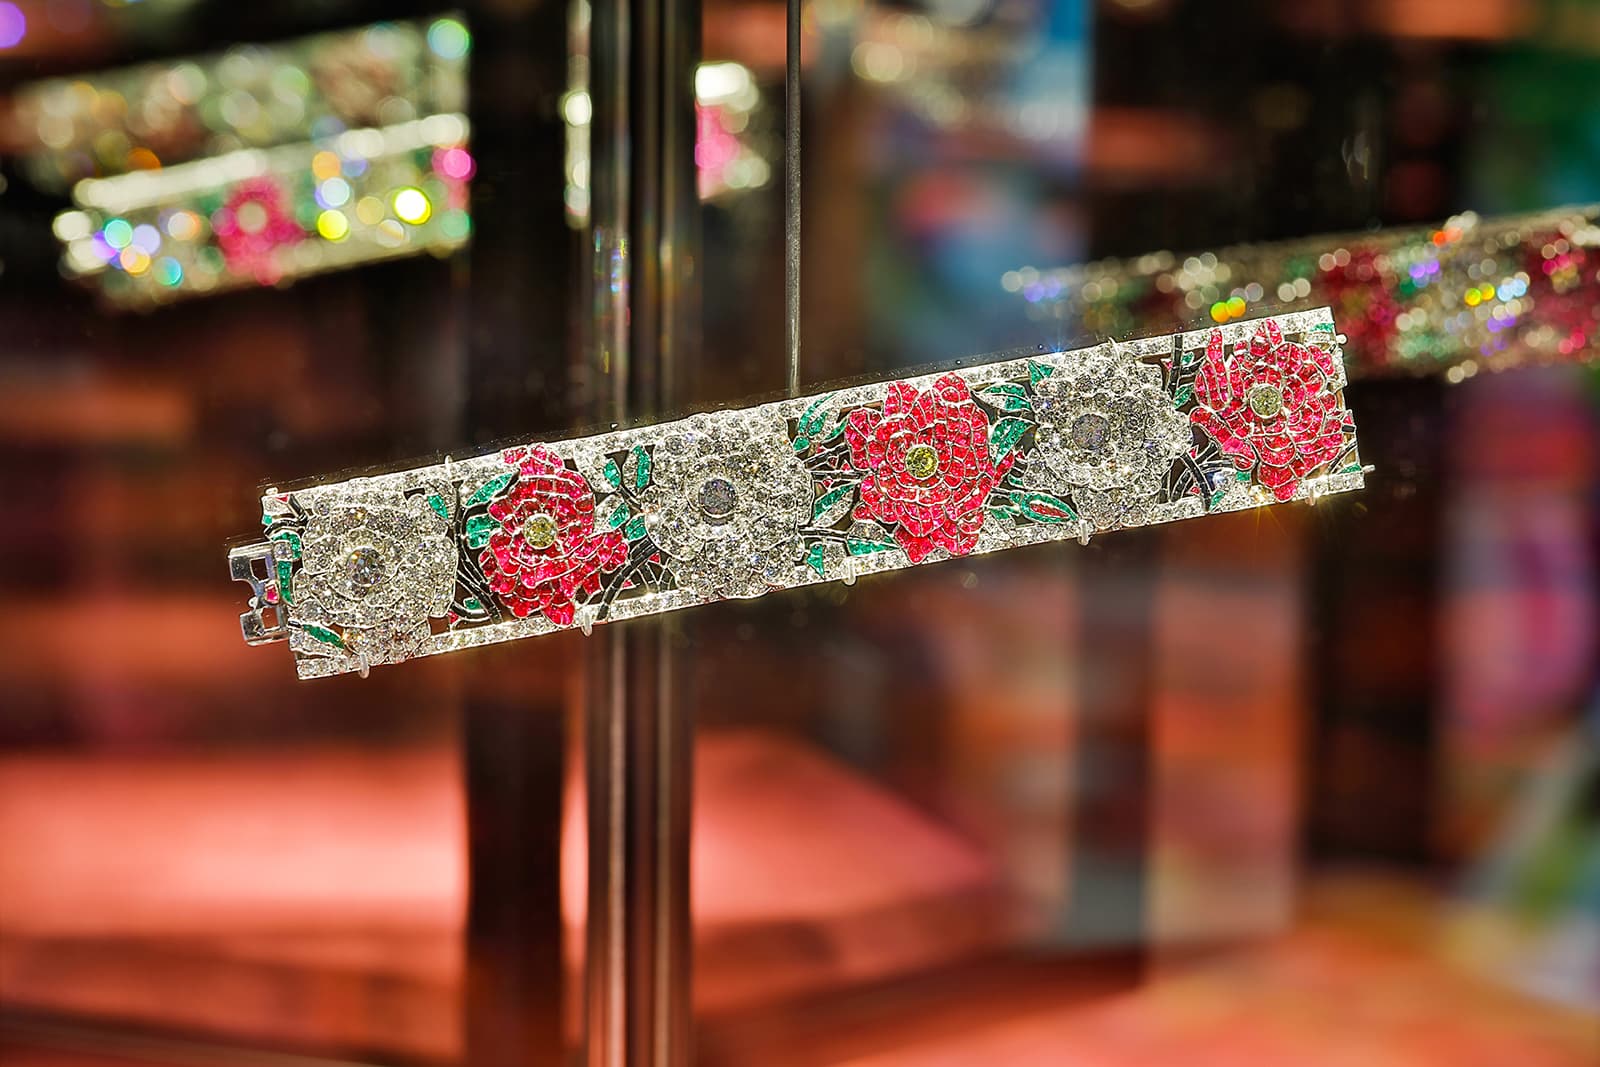 Van Cleef & Arpels Intertwined Flowers bracelet with red and white roses from 1924, presented as part of the Florae exhibition